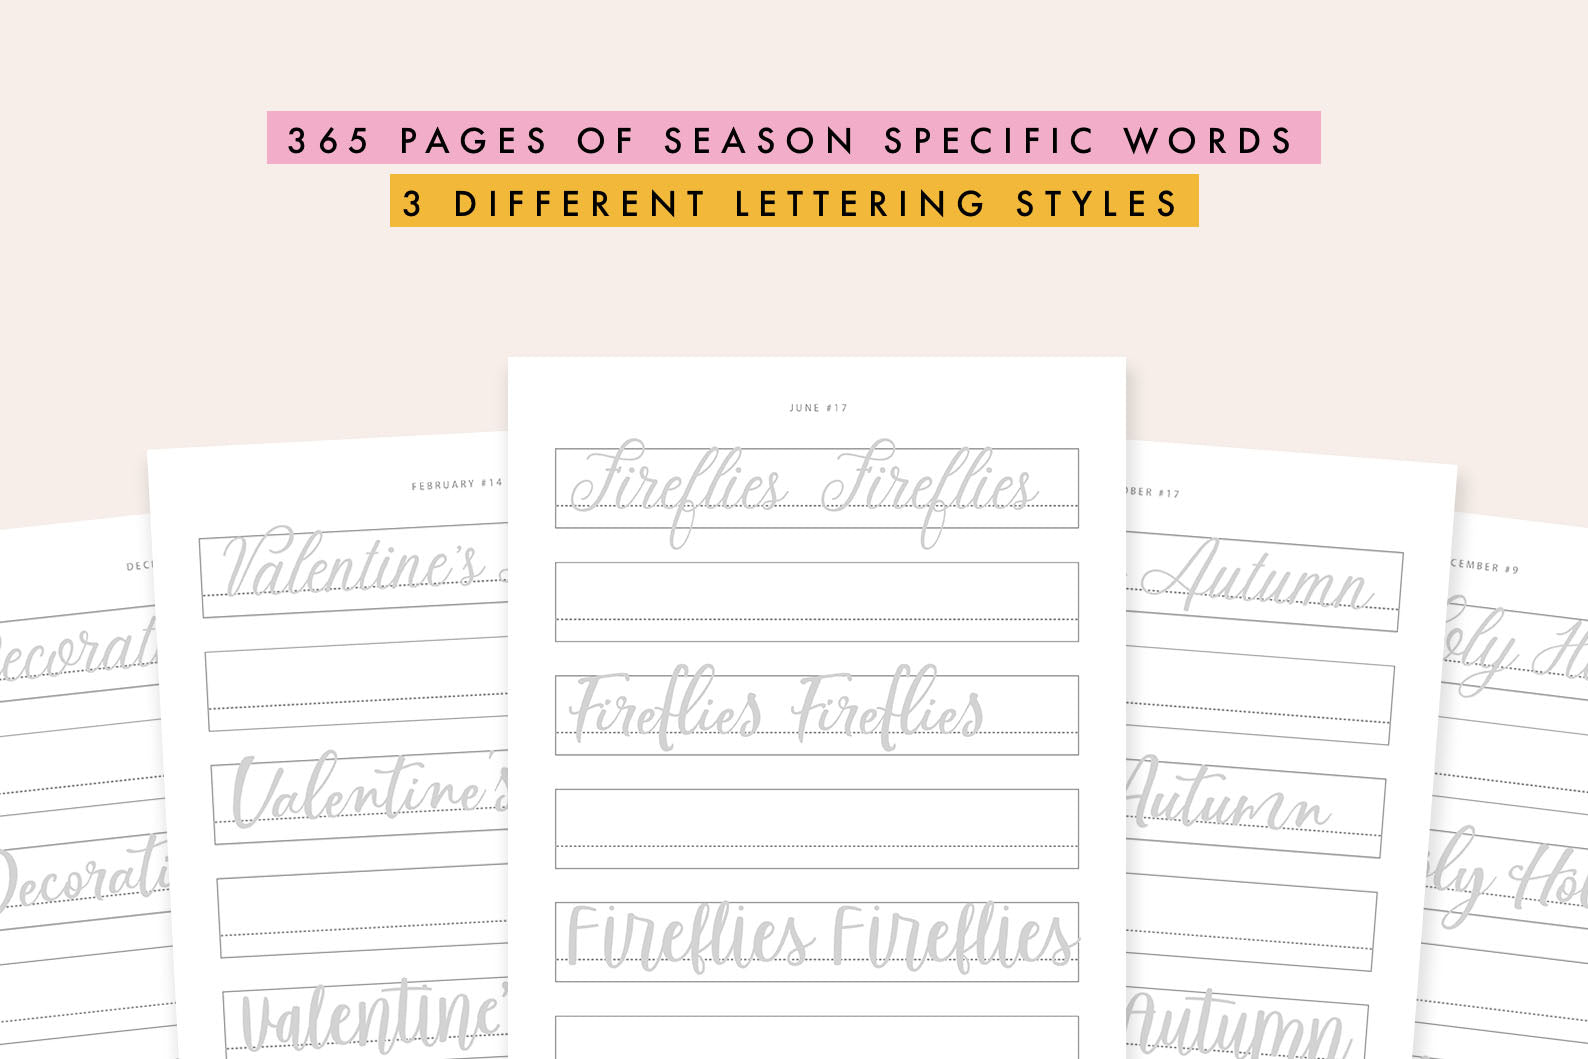 365 Days Of Lettering Workbook